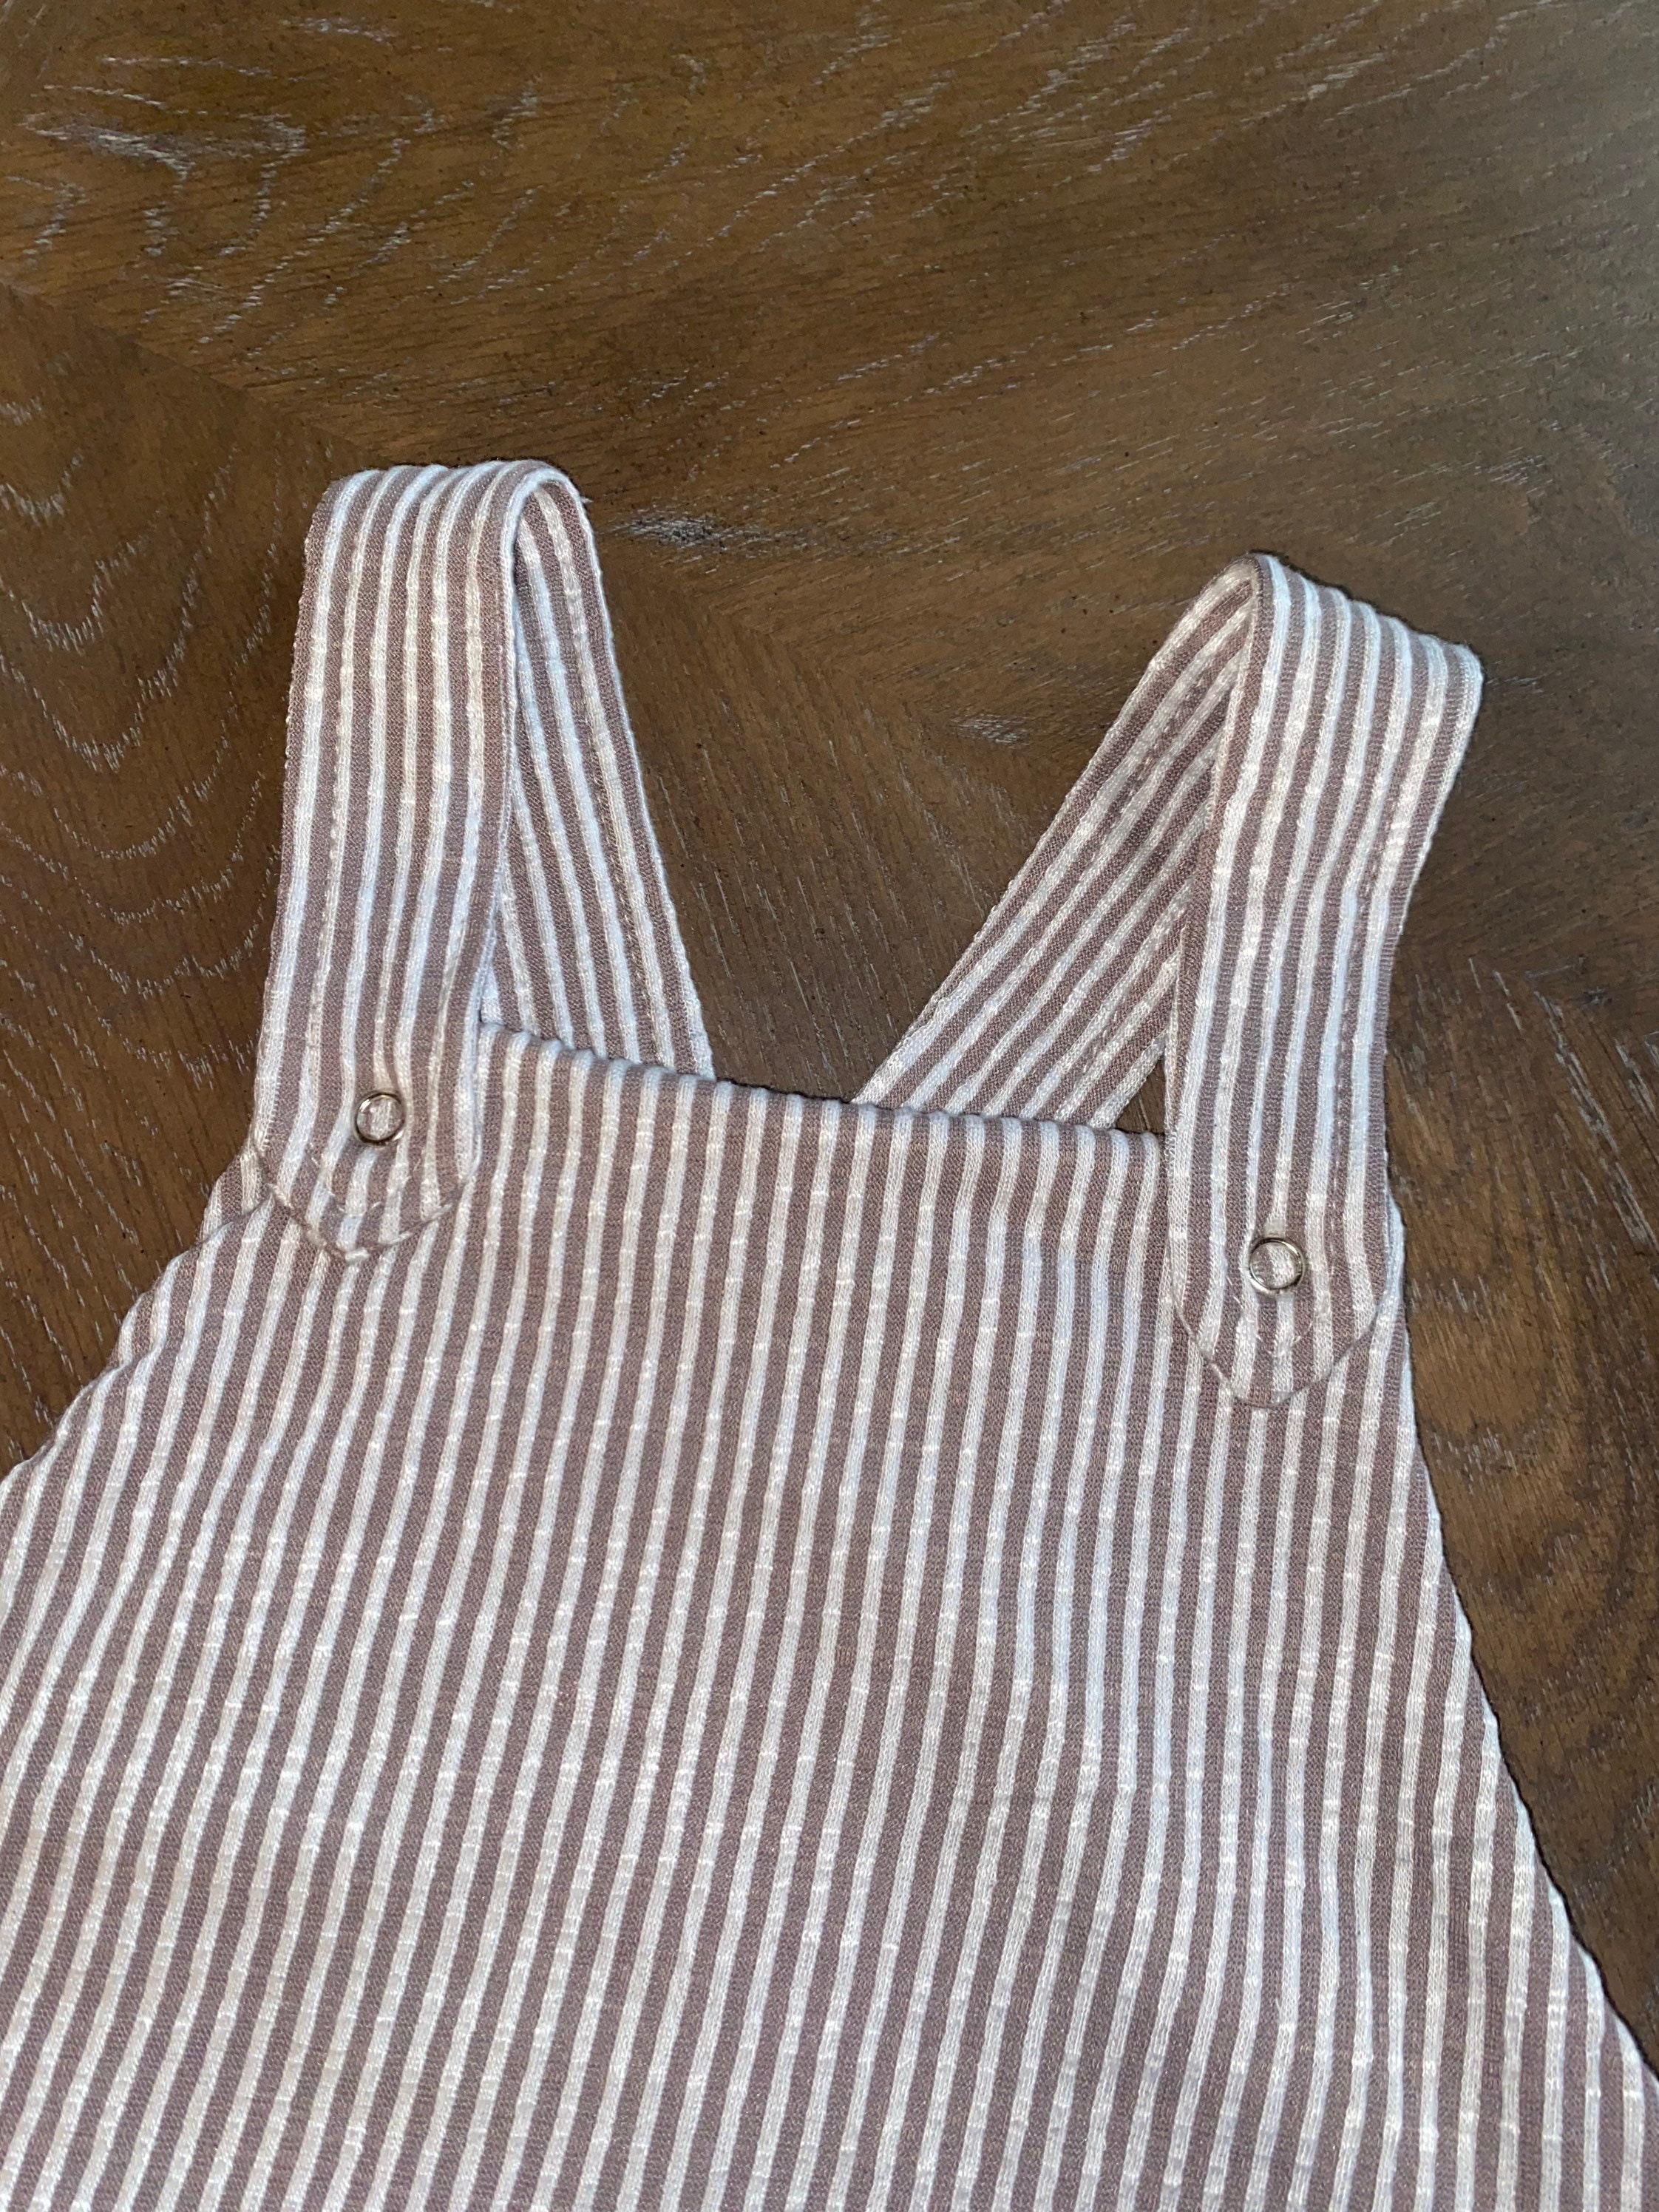 cute and made to fit Made with Love by Mexican artisans from Jalisco The perfect clothing accessory for newborn baby boys Size 0-3 Months IOC 100% Organic Cotton Handmade Mexican Overalls 